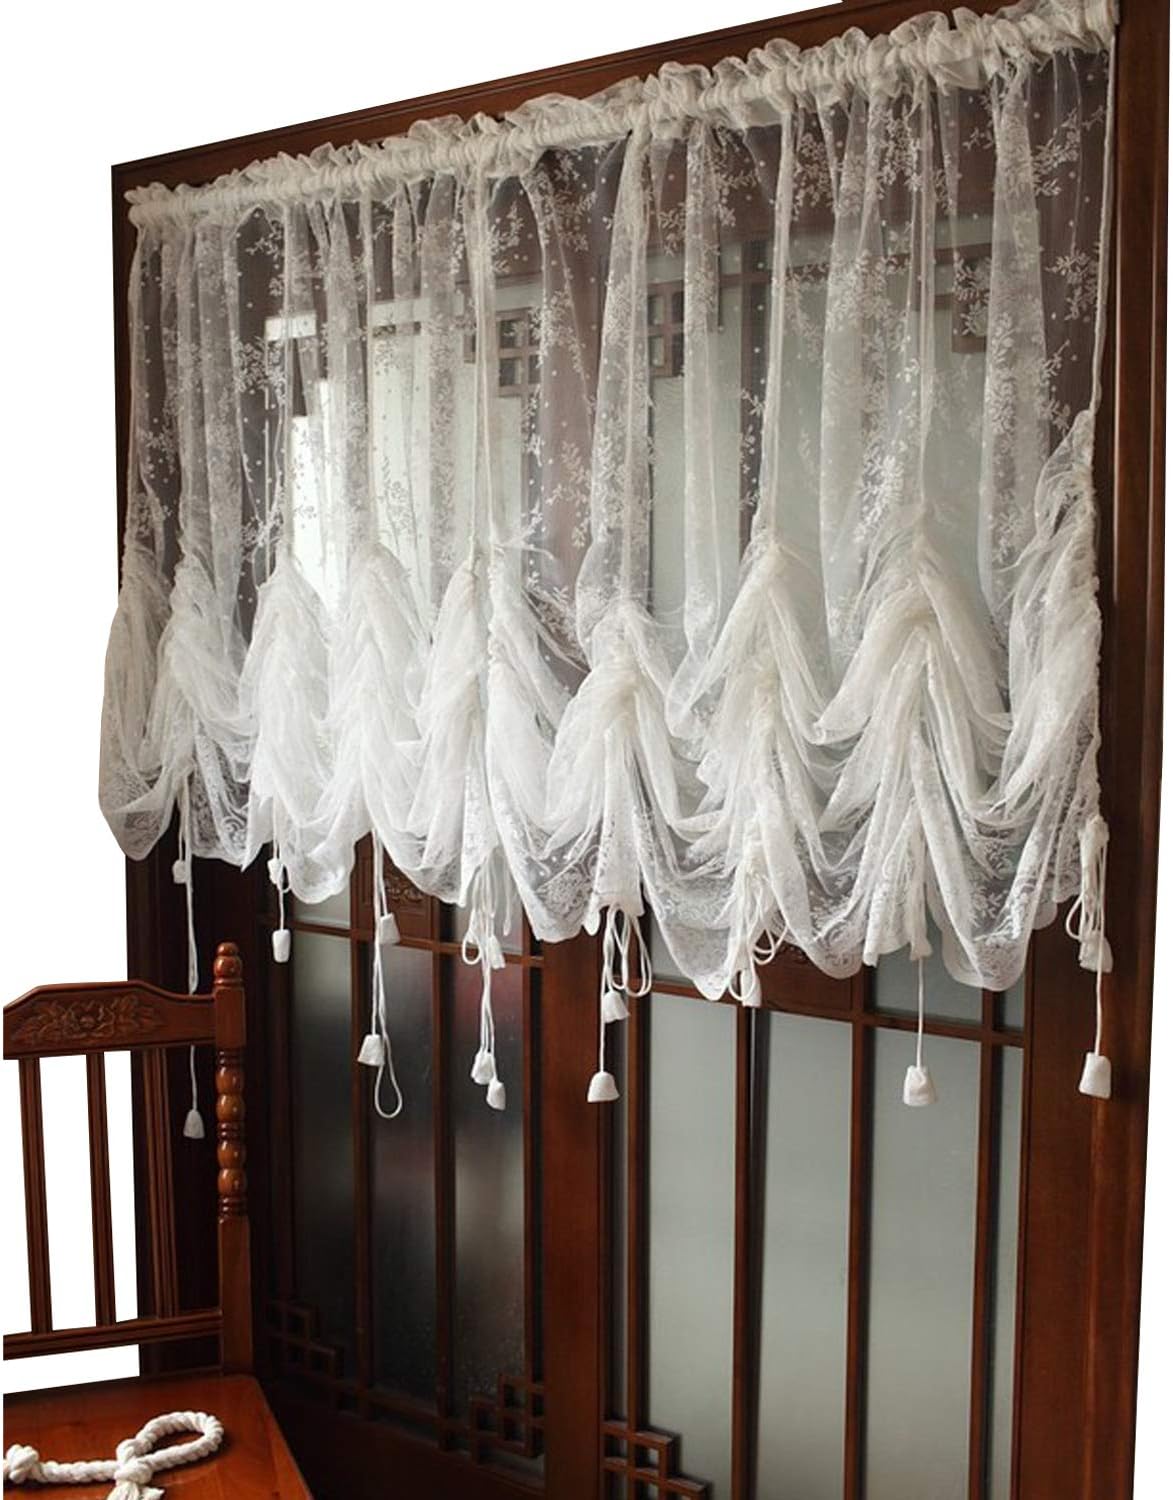 FADFAY Lace Balloon Curtain White Adjustable Tie-Up Curtain Shade, Embroidered Semi Sheer Farmhouse Drape for Living Room Bedroom Dining Room, 1 Panel Floral Tulle Curtains for Windows-78''59''